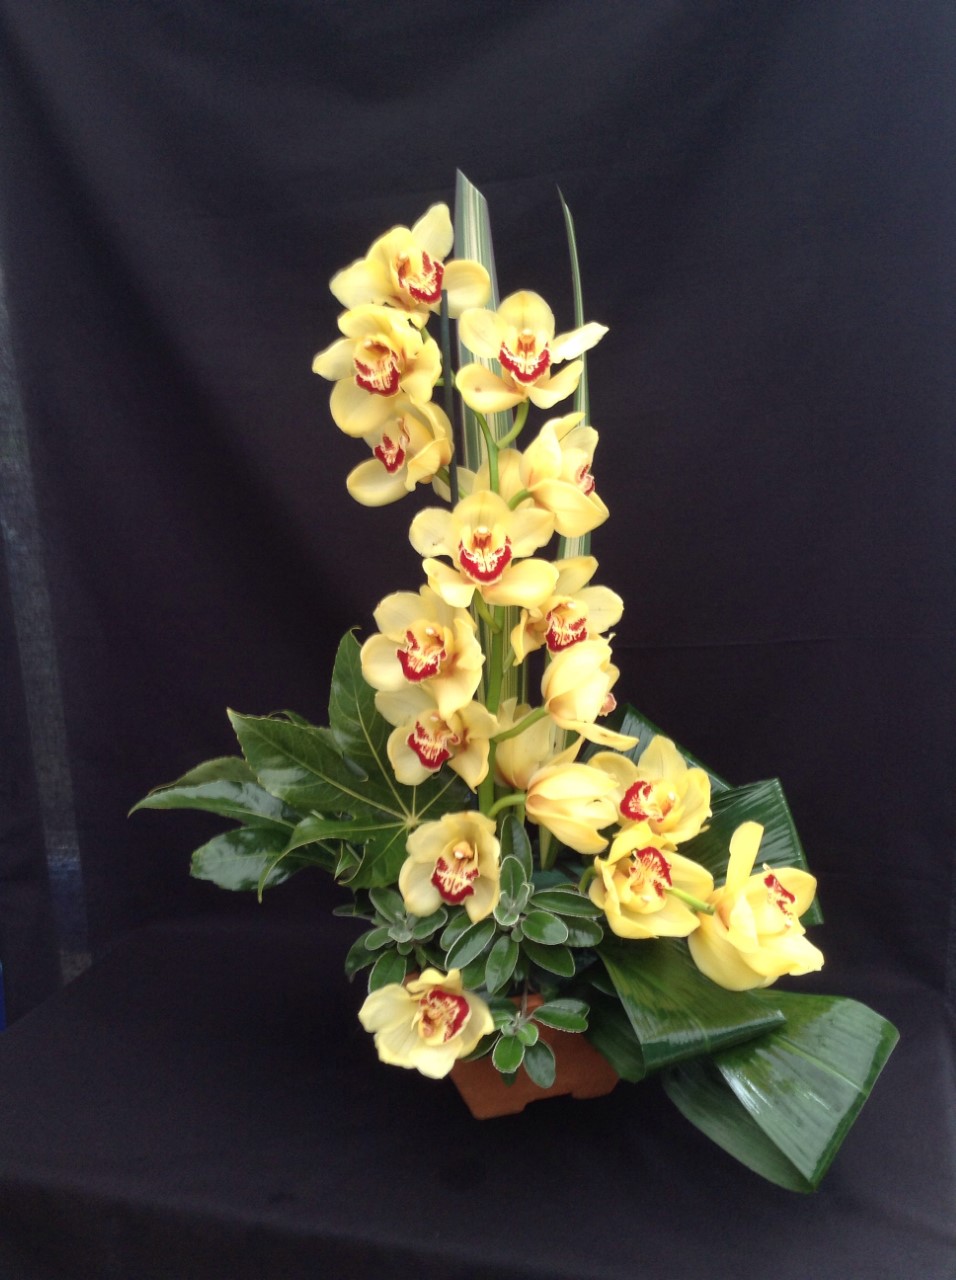 Class 3 Simple Beauty- Rosemary Abrams - Dorchester Floral Group